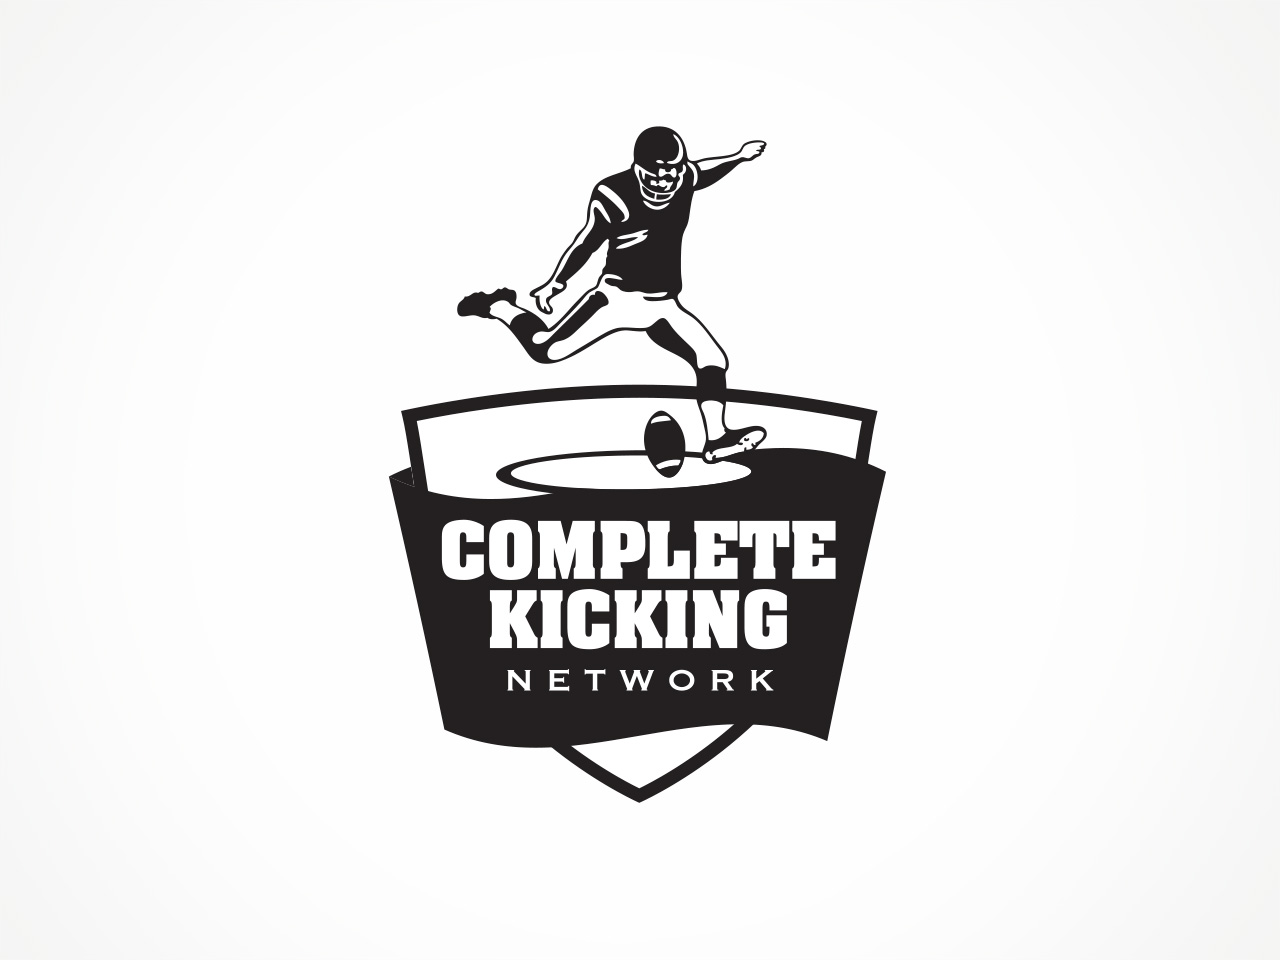 Complete Kicking Network